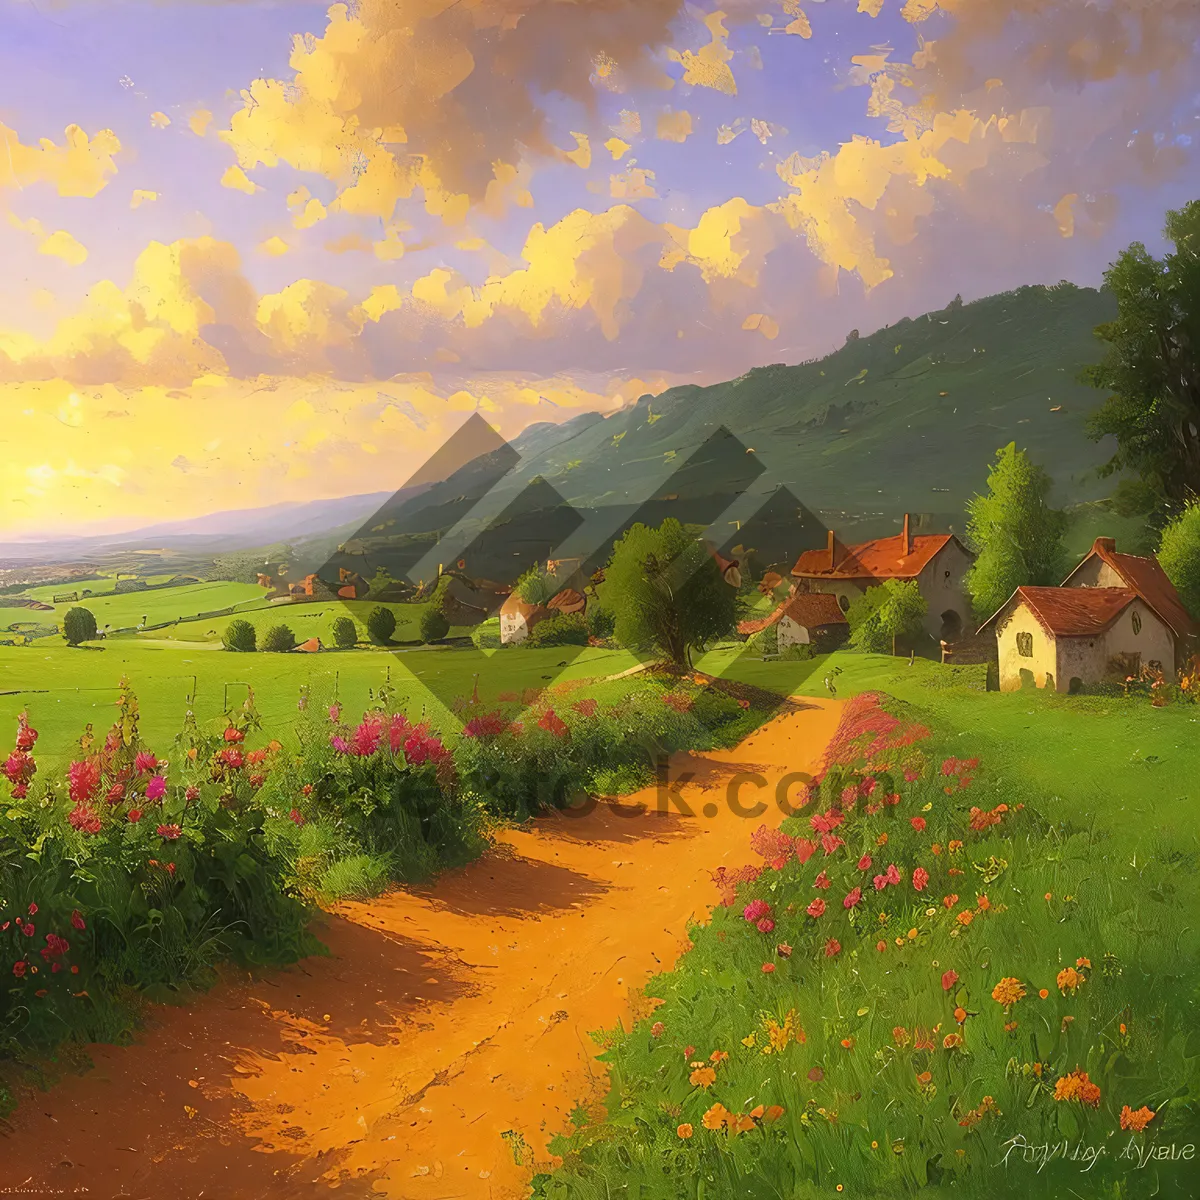 Picture of Sunny day lily field in rural landscape